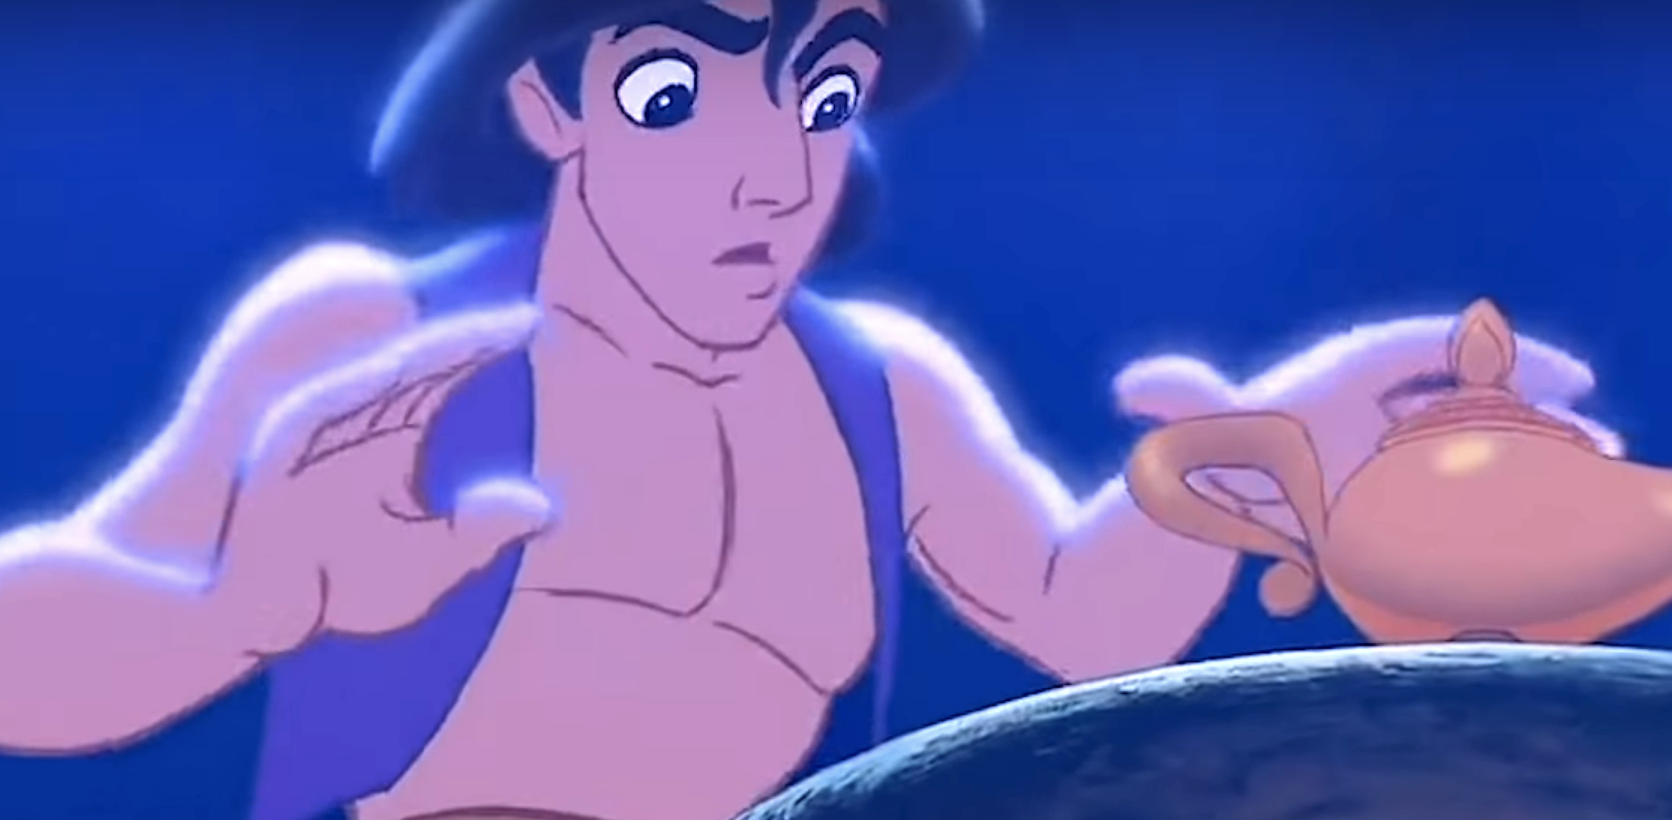 Aladdin about to grab the lamp